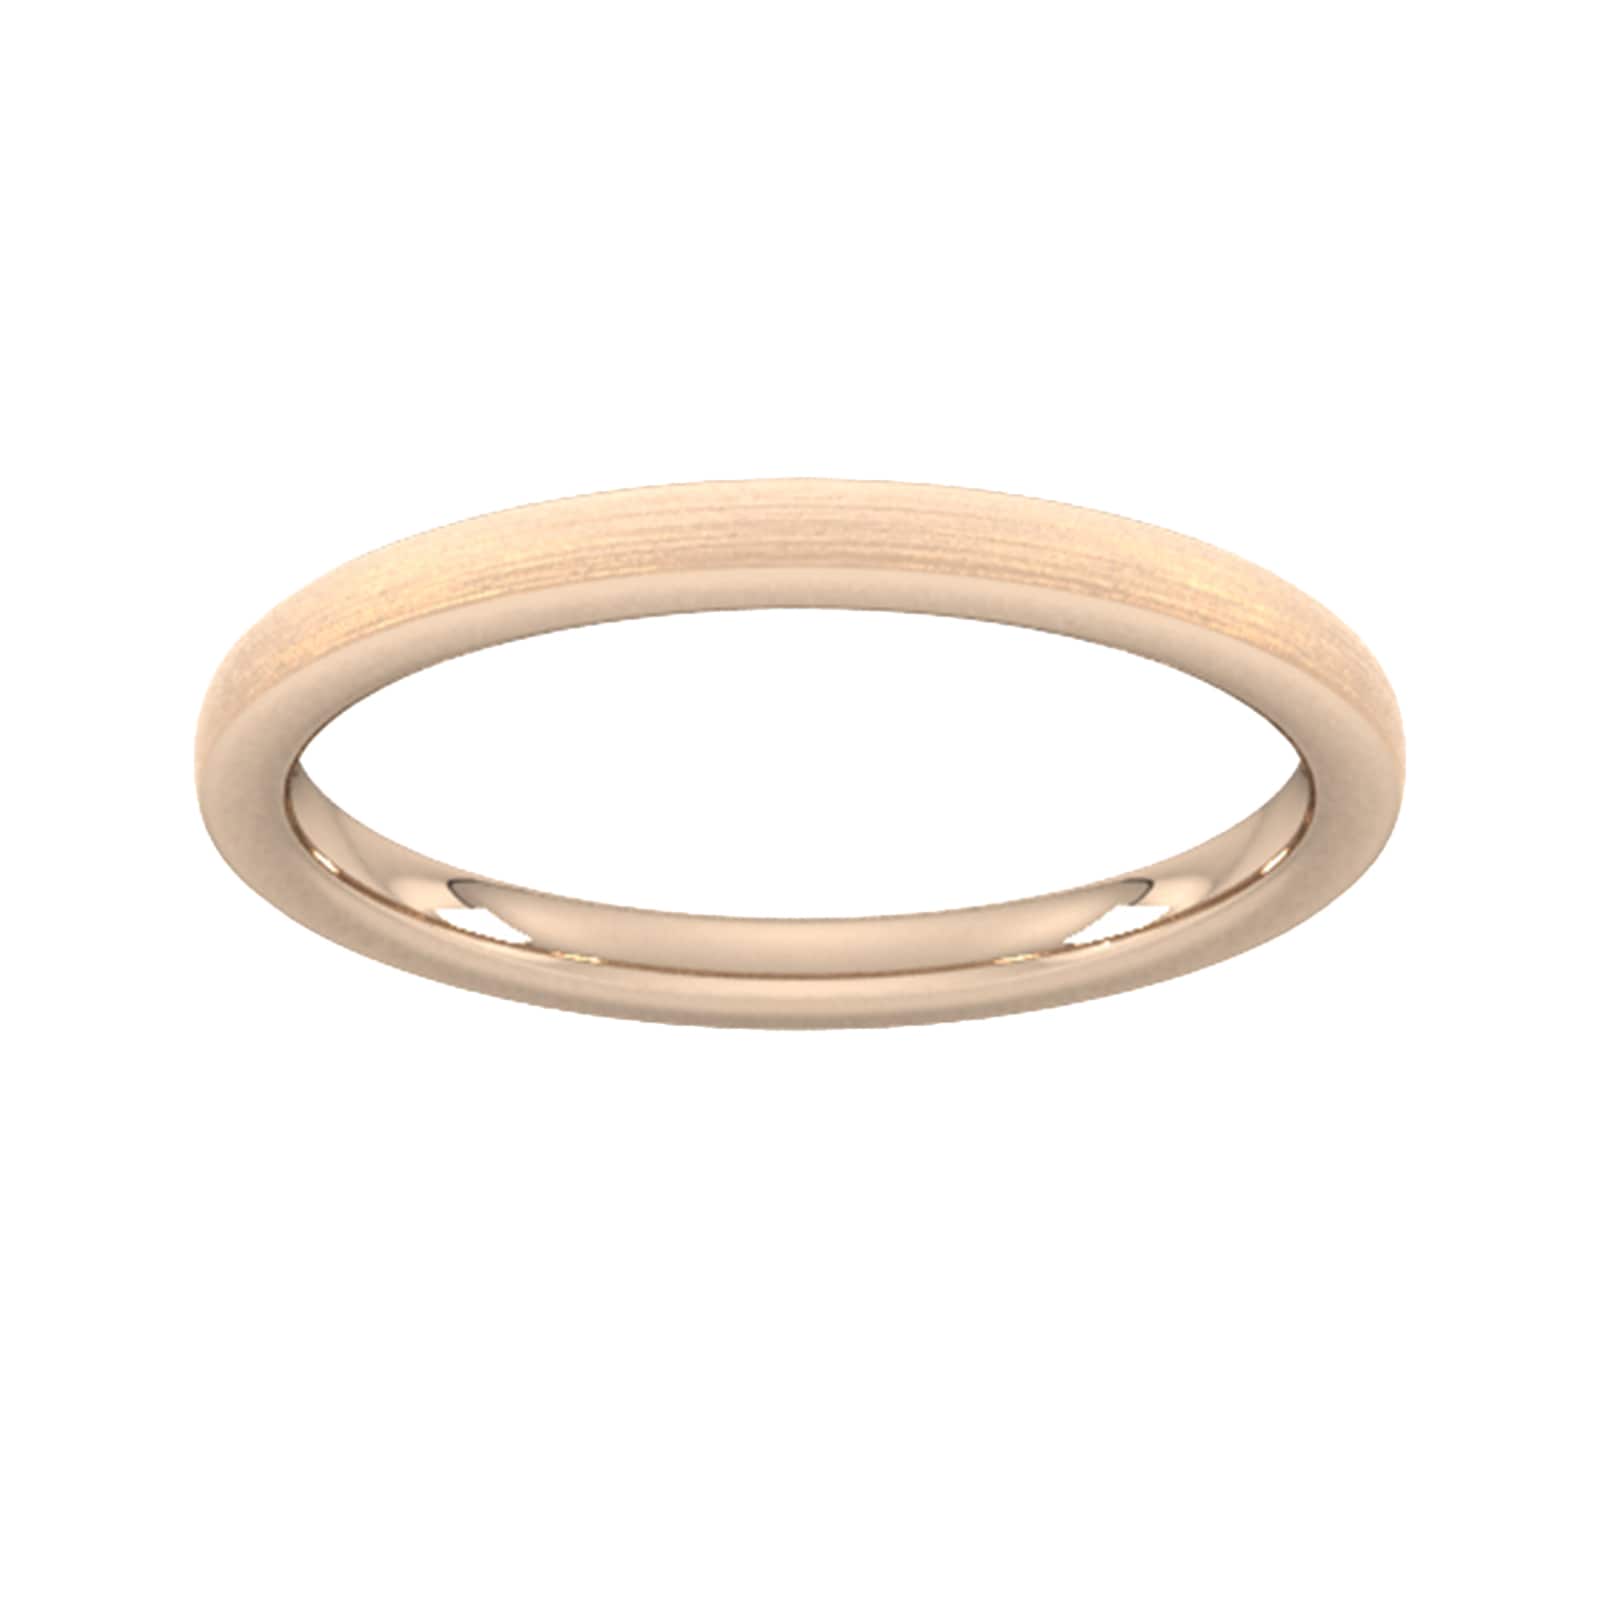 2mm Slight Court Heavy Polished Chamfered Edges With Matt Centre Wedding Ring In 9 Carat Rose Gold - Ring Size G